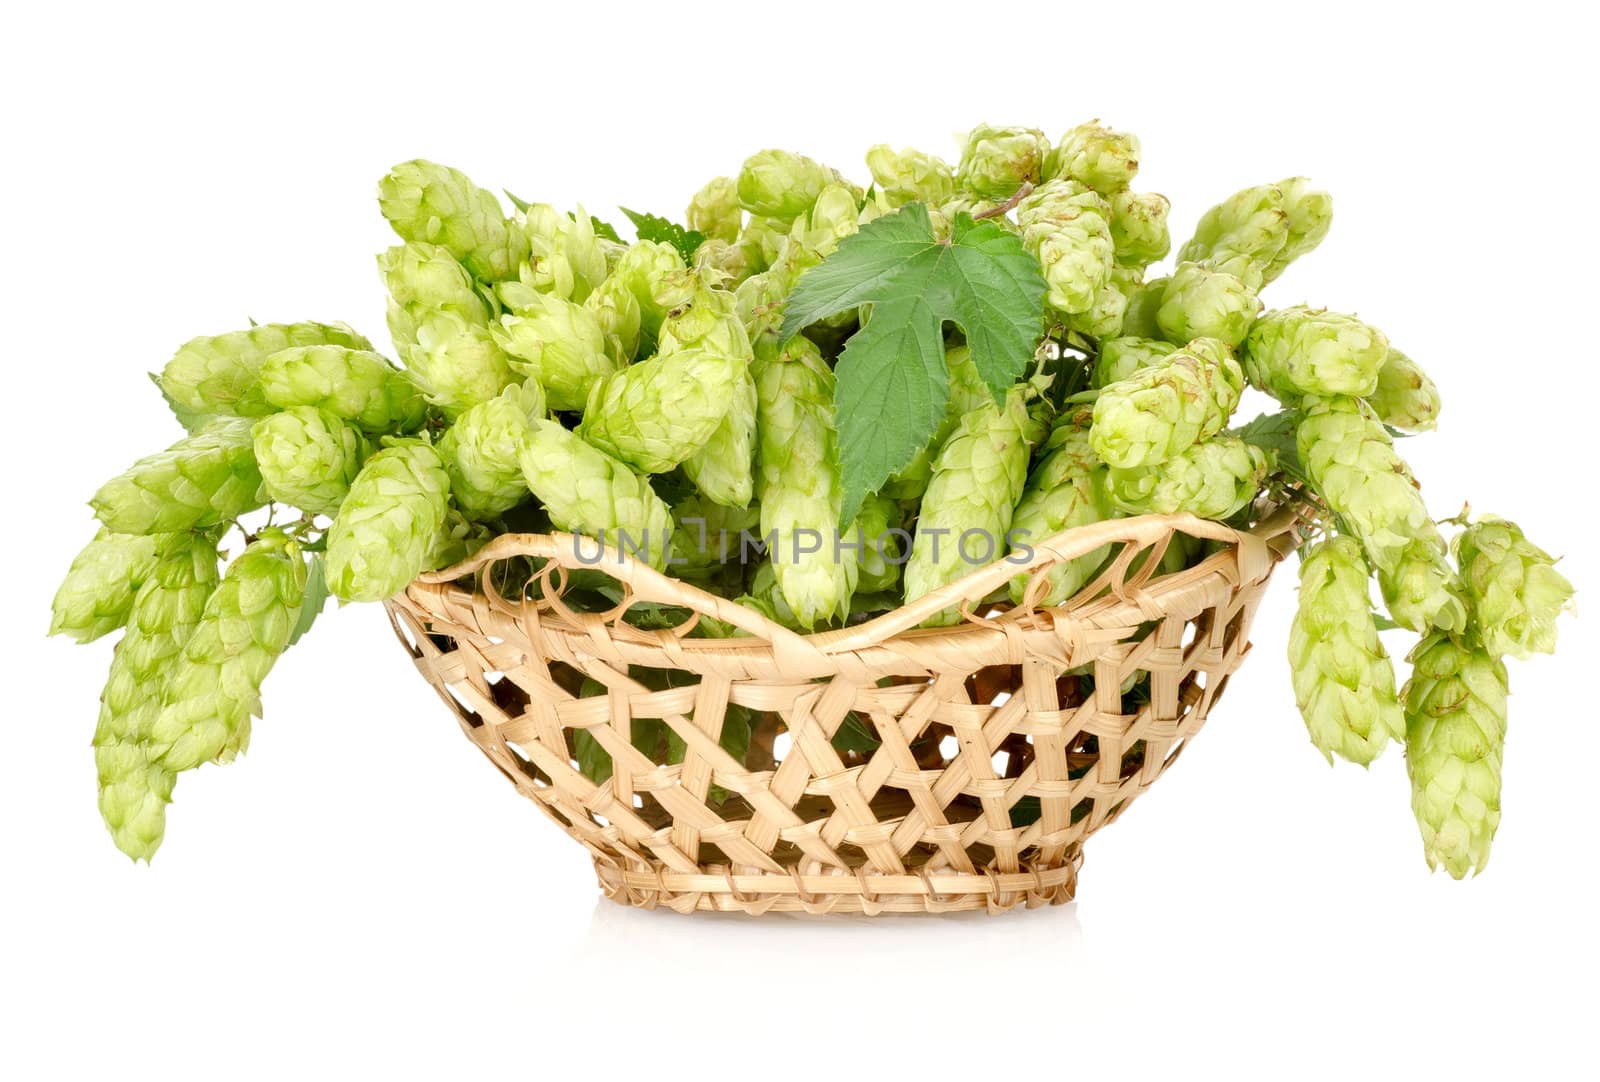 Hops in a wooden basket isolated on white background